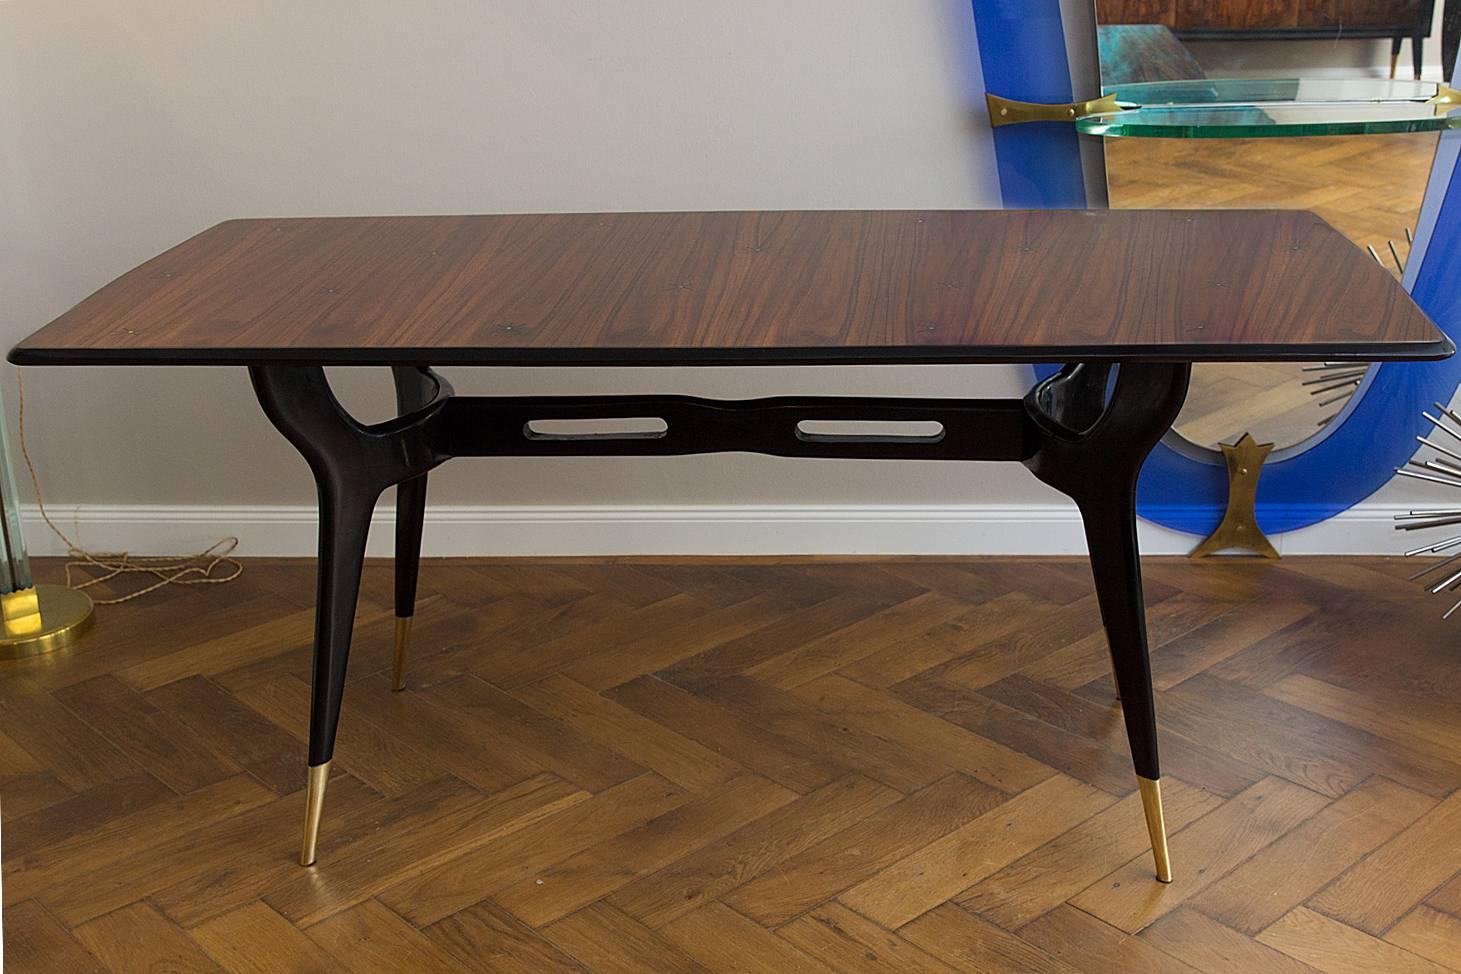 Very unusual amazing dining table, Italy, circa 1950, attributed to Ico Parisi, elegant organic shape, brass legs, rosewood veneer with black star and brass inlay, black shellac polished table edge. Organic shape black polished table legs. 
All in